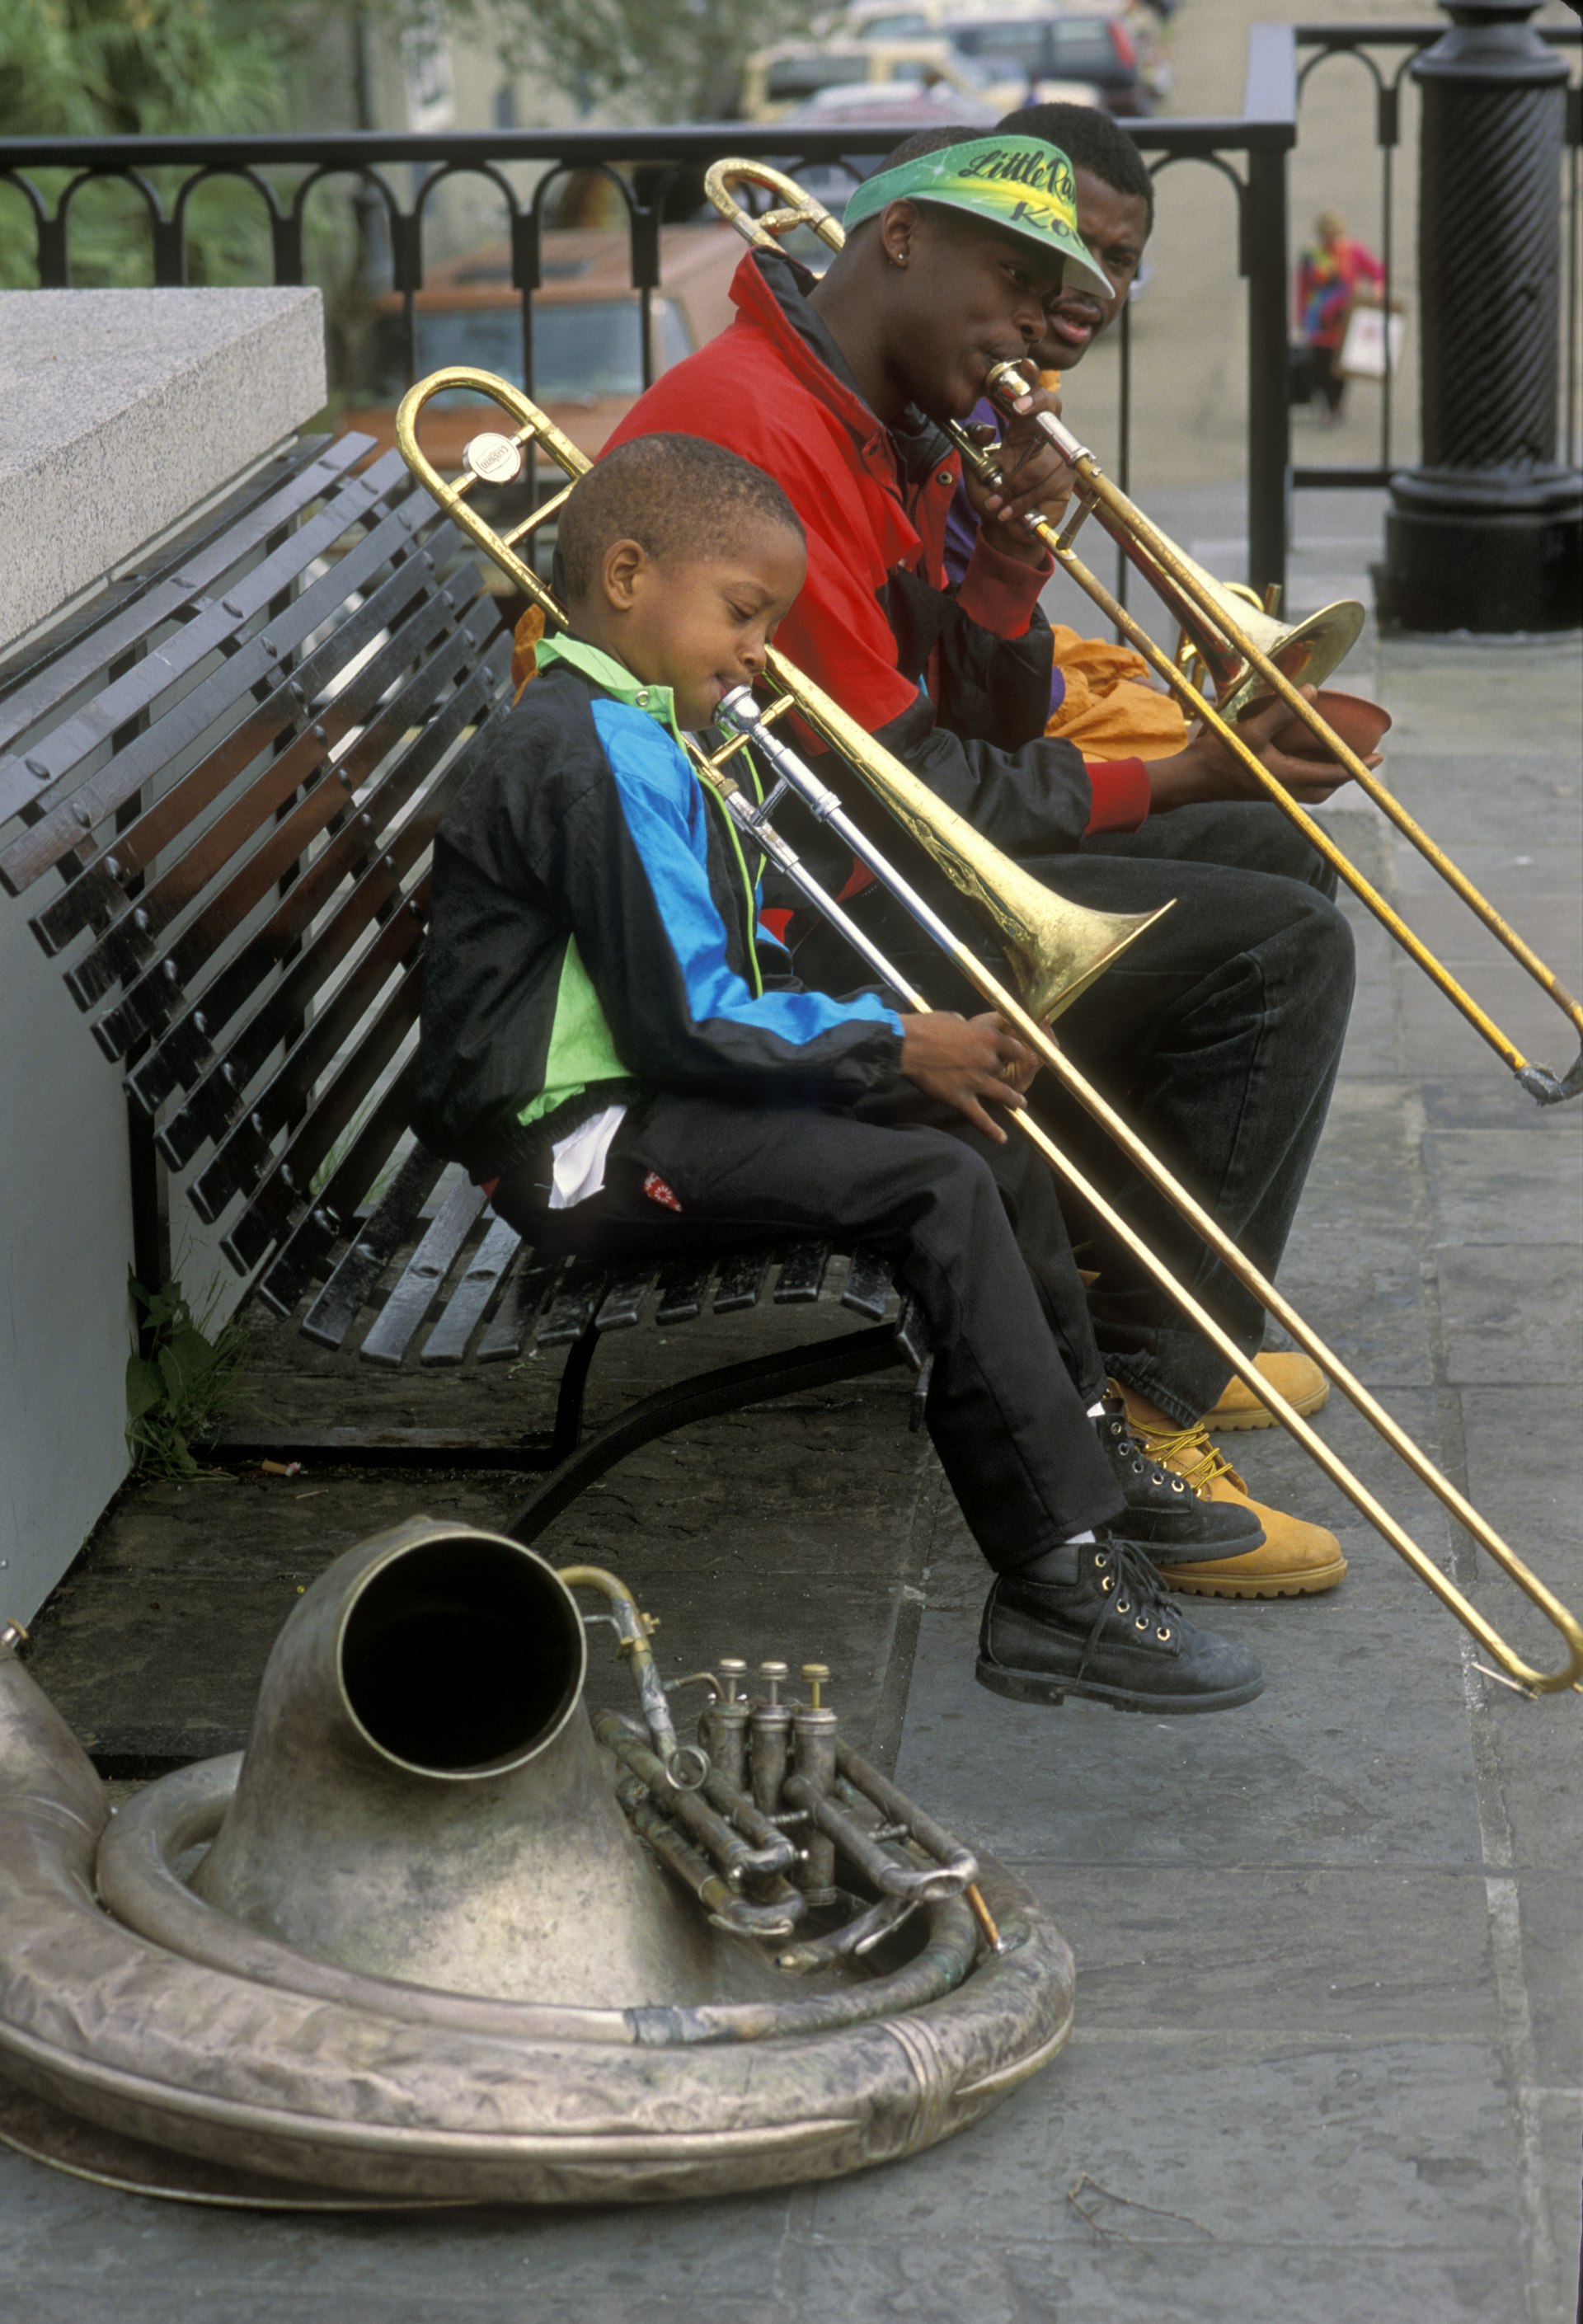 Seven-year-old Michael Andrews practices with some older members of his band before a Mardi Gras parade in the French Quarter of New Orleans, Louisiana